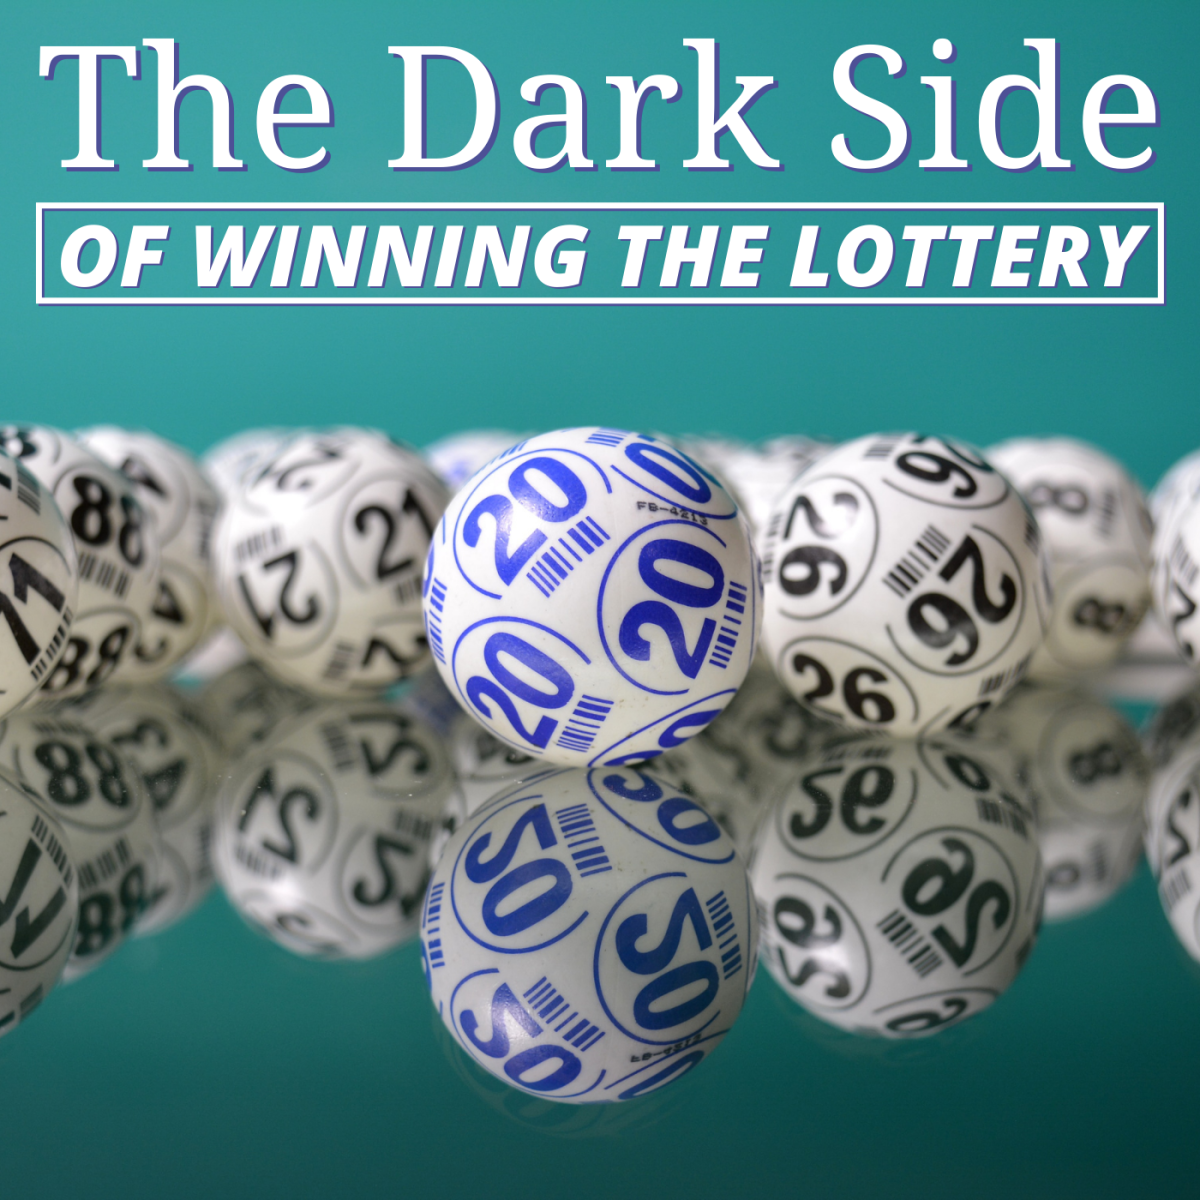 Everyone wants to win the lottery . . . but should they? 